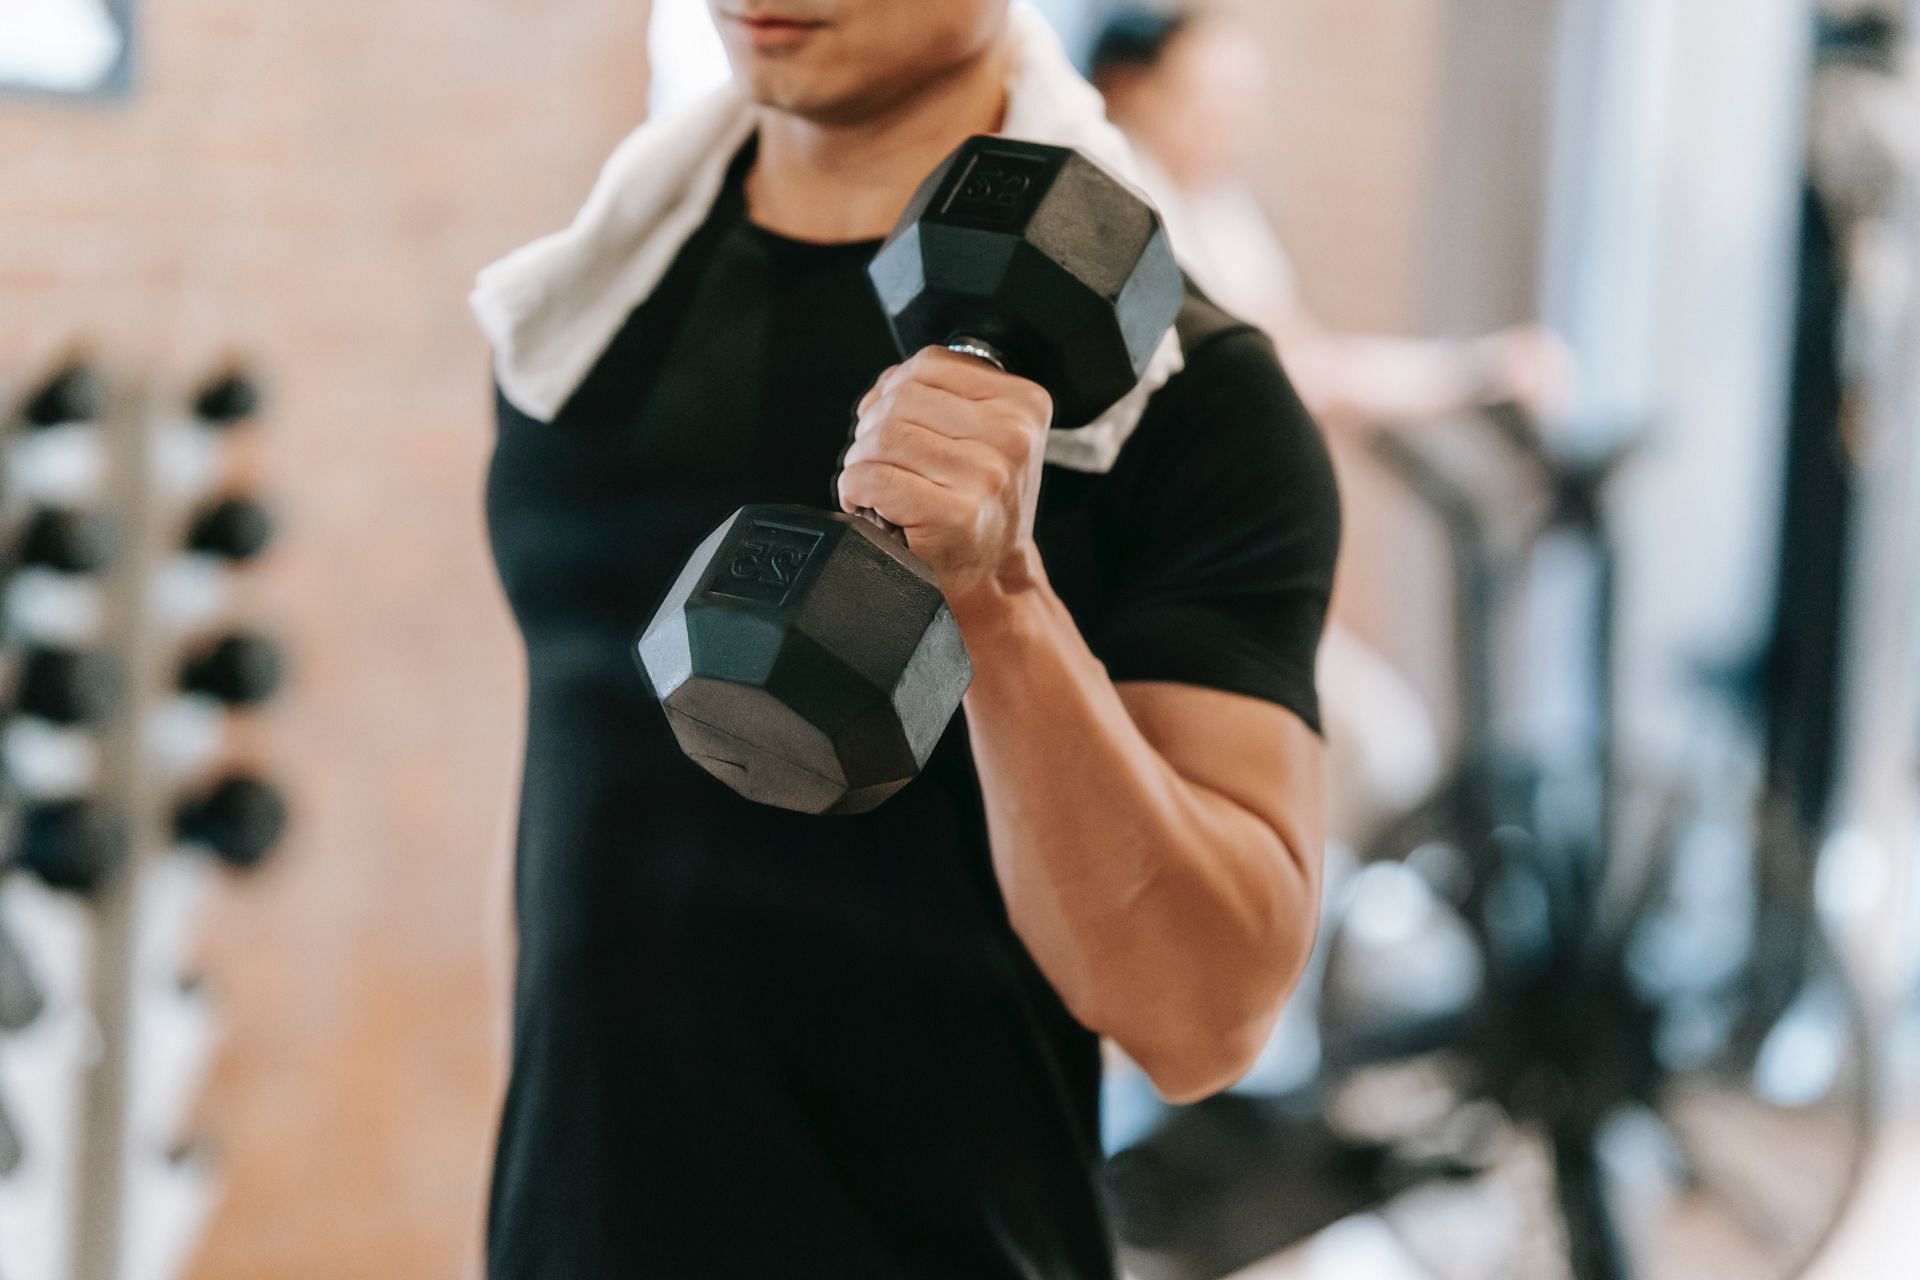 Understanding muscular contractions help in getting most out of the exercise. (Image via Pexels/ Andres Ayrton)